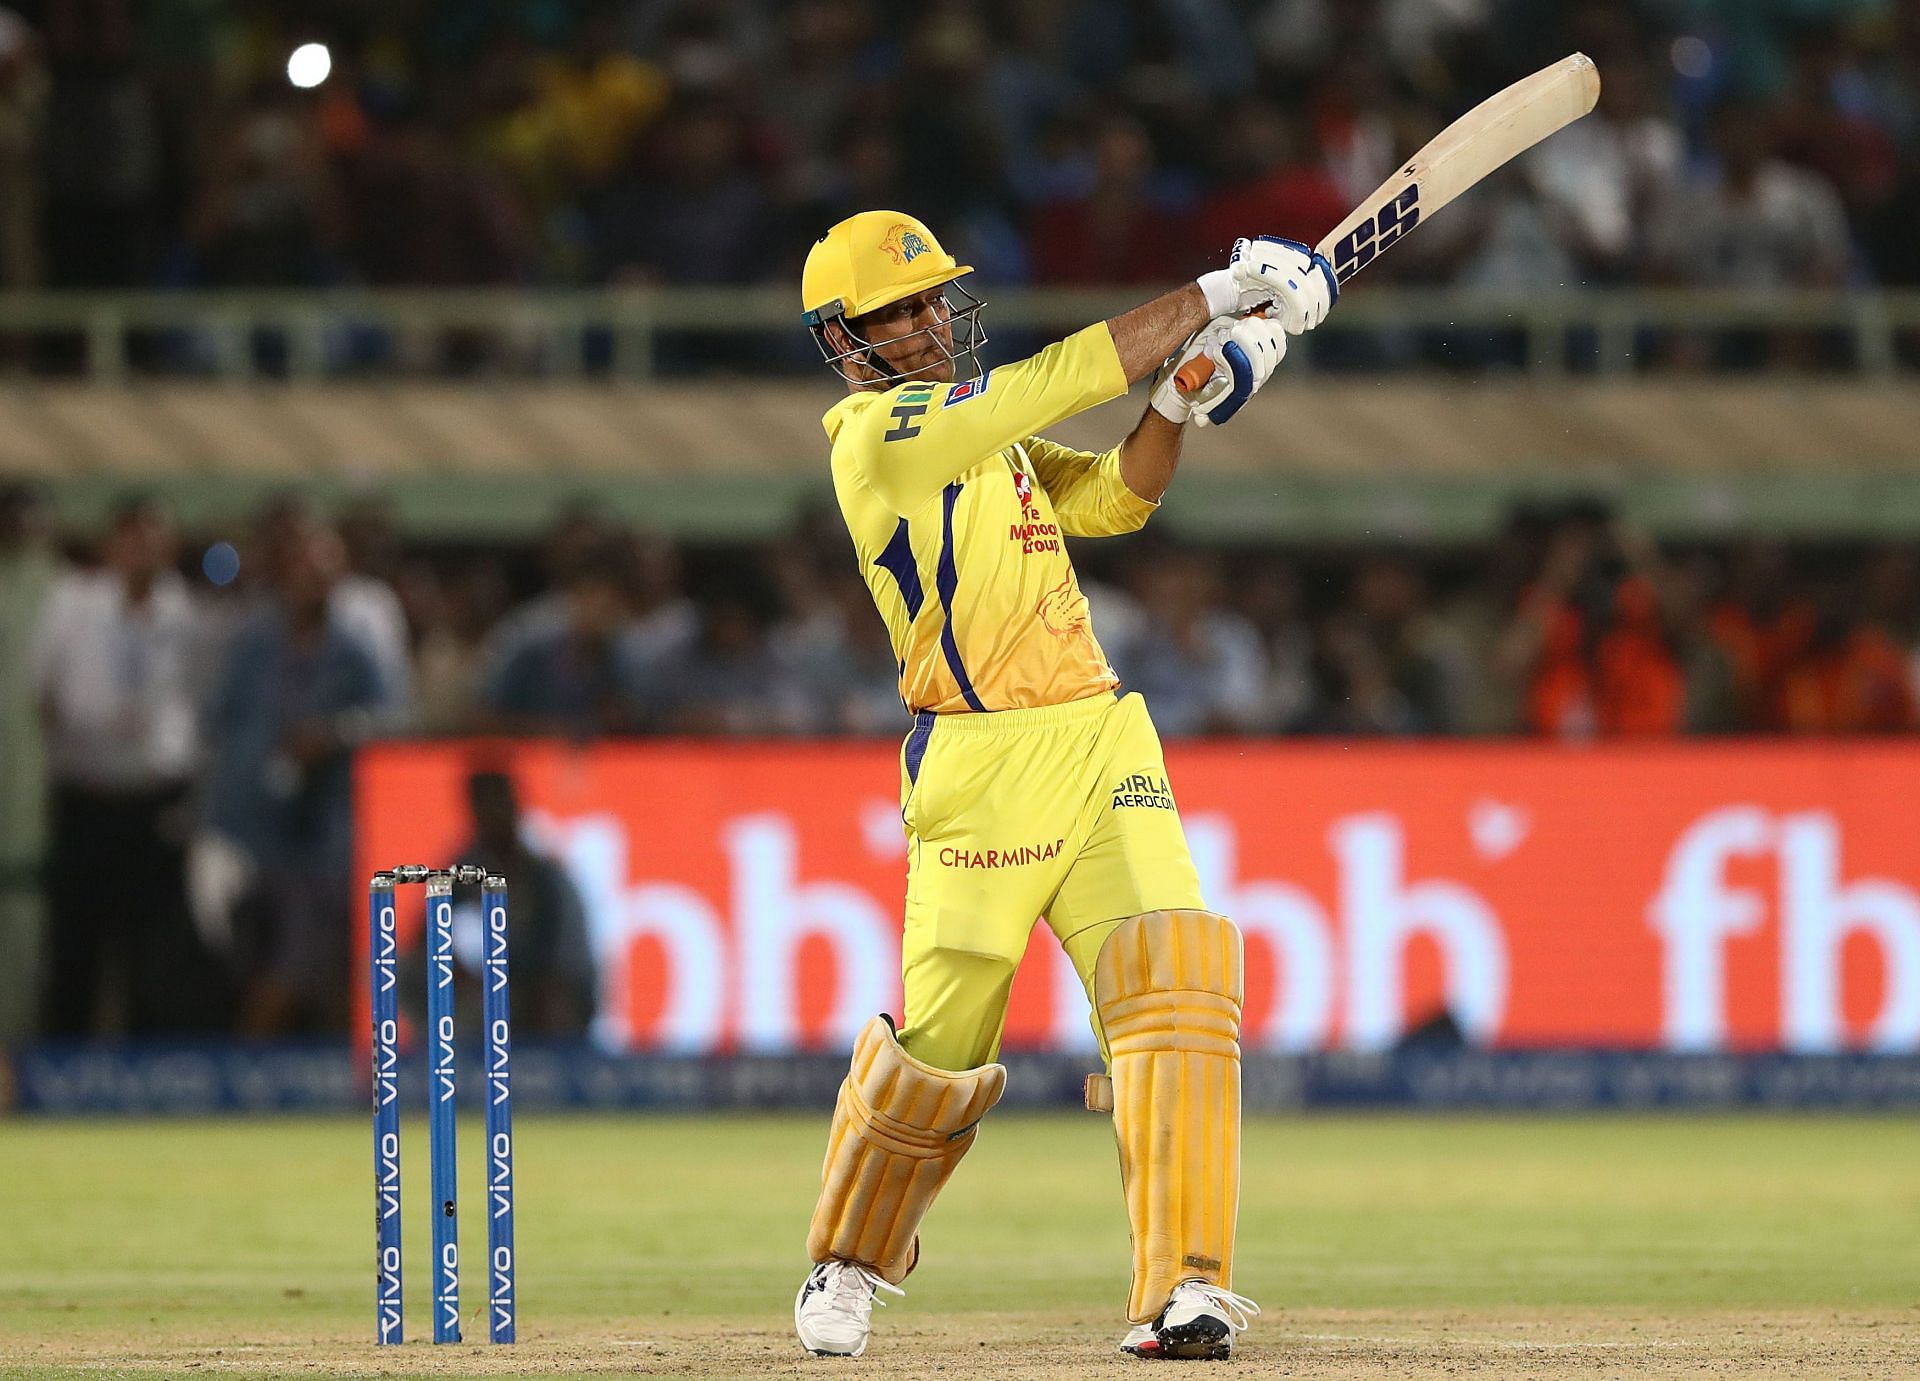 MS Dhoni is the top run-getter in DC-CSK matches